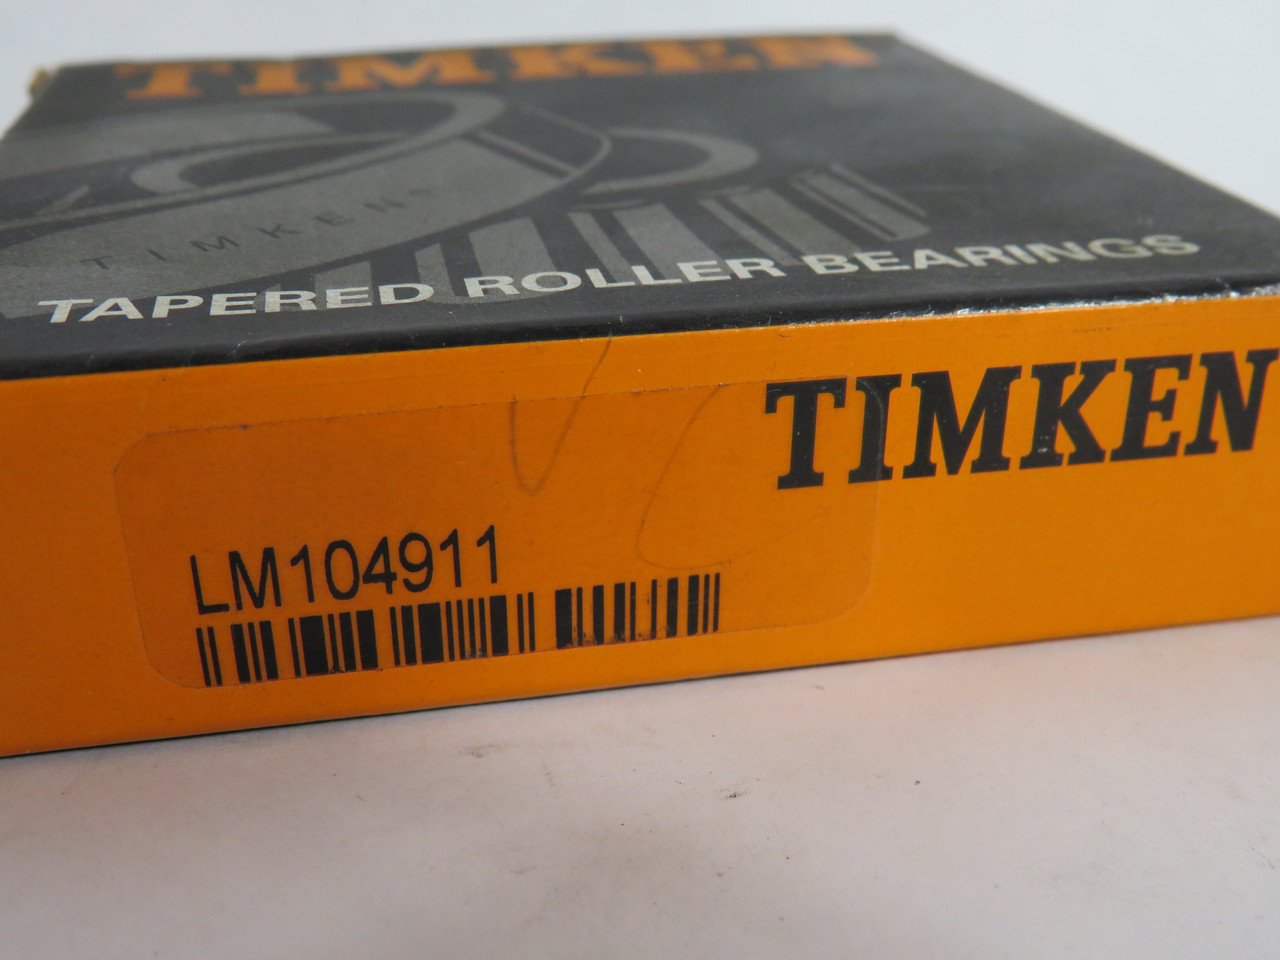 Timken LM104911 Tapered Roller Bearing Cup 3.250"OD 0.650"W NEW